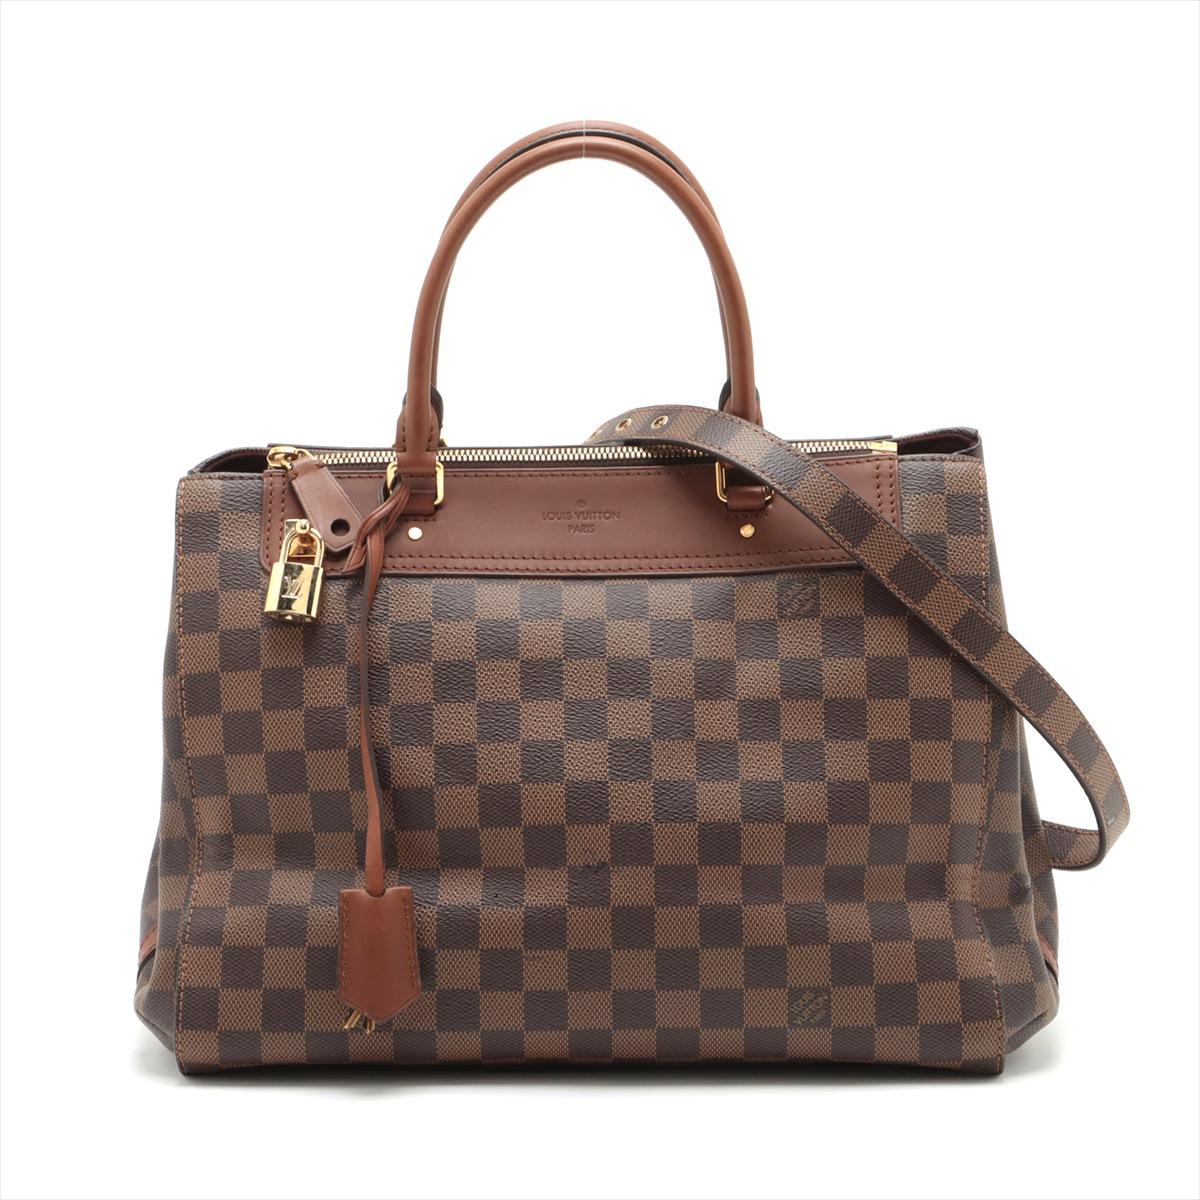 The Louis Vuitton Damier Greenwich Two-Way Handbag is a versatile and timeless accessory that exudes sophistication. Crafted from the iconic Damier canvas, the bag features a classic checkered pattern that reflects the brand's heritage. The neutral